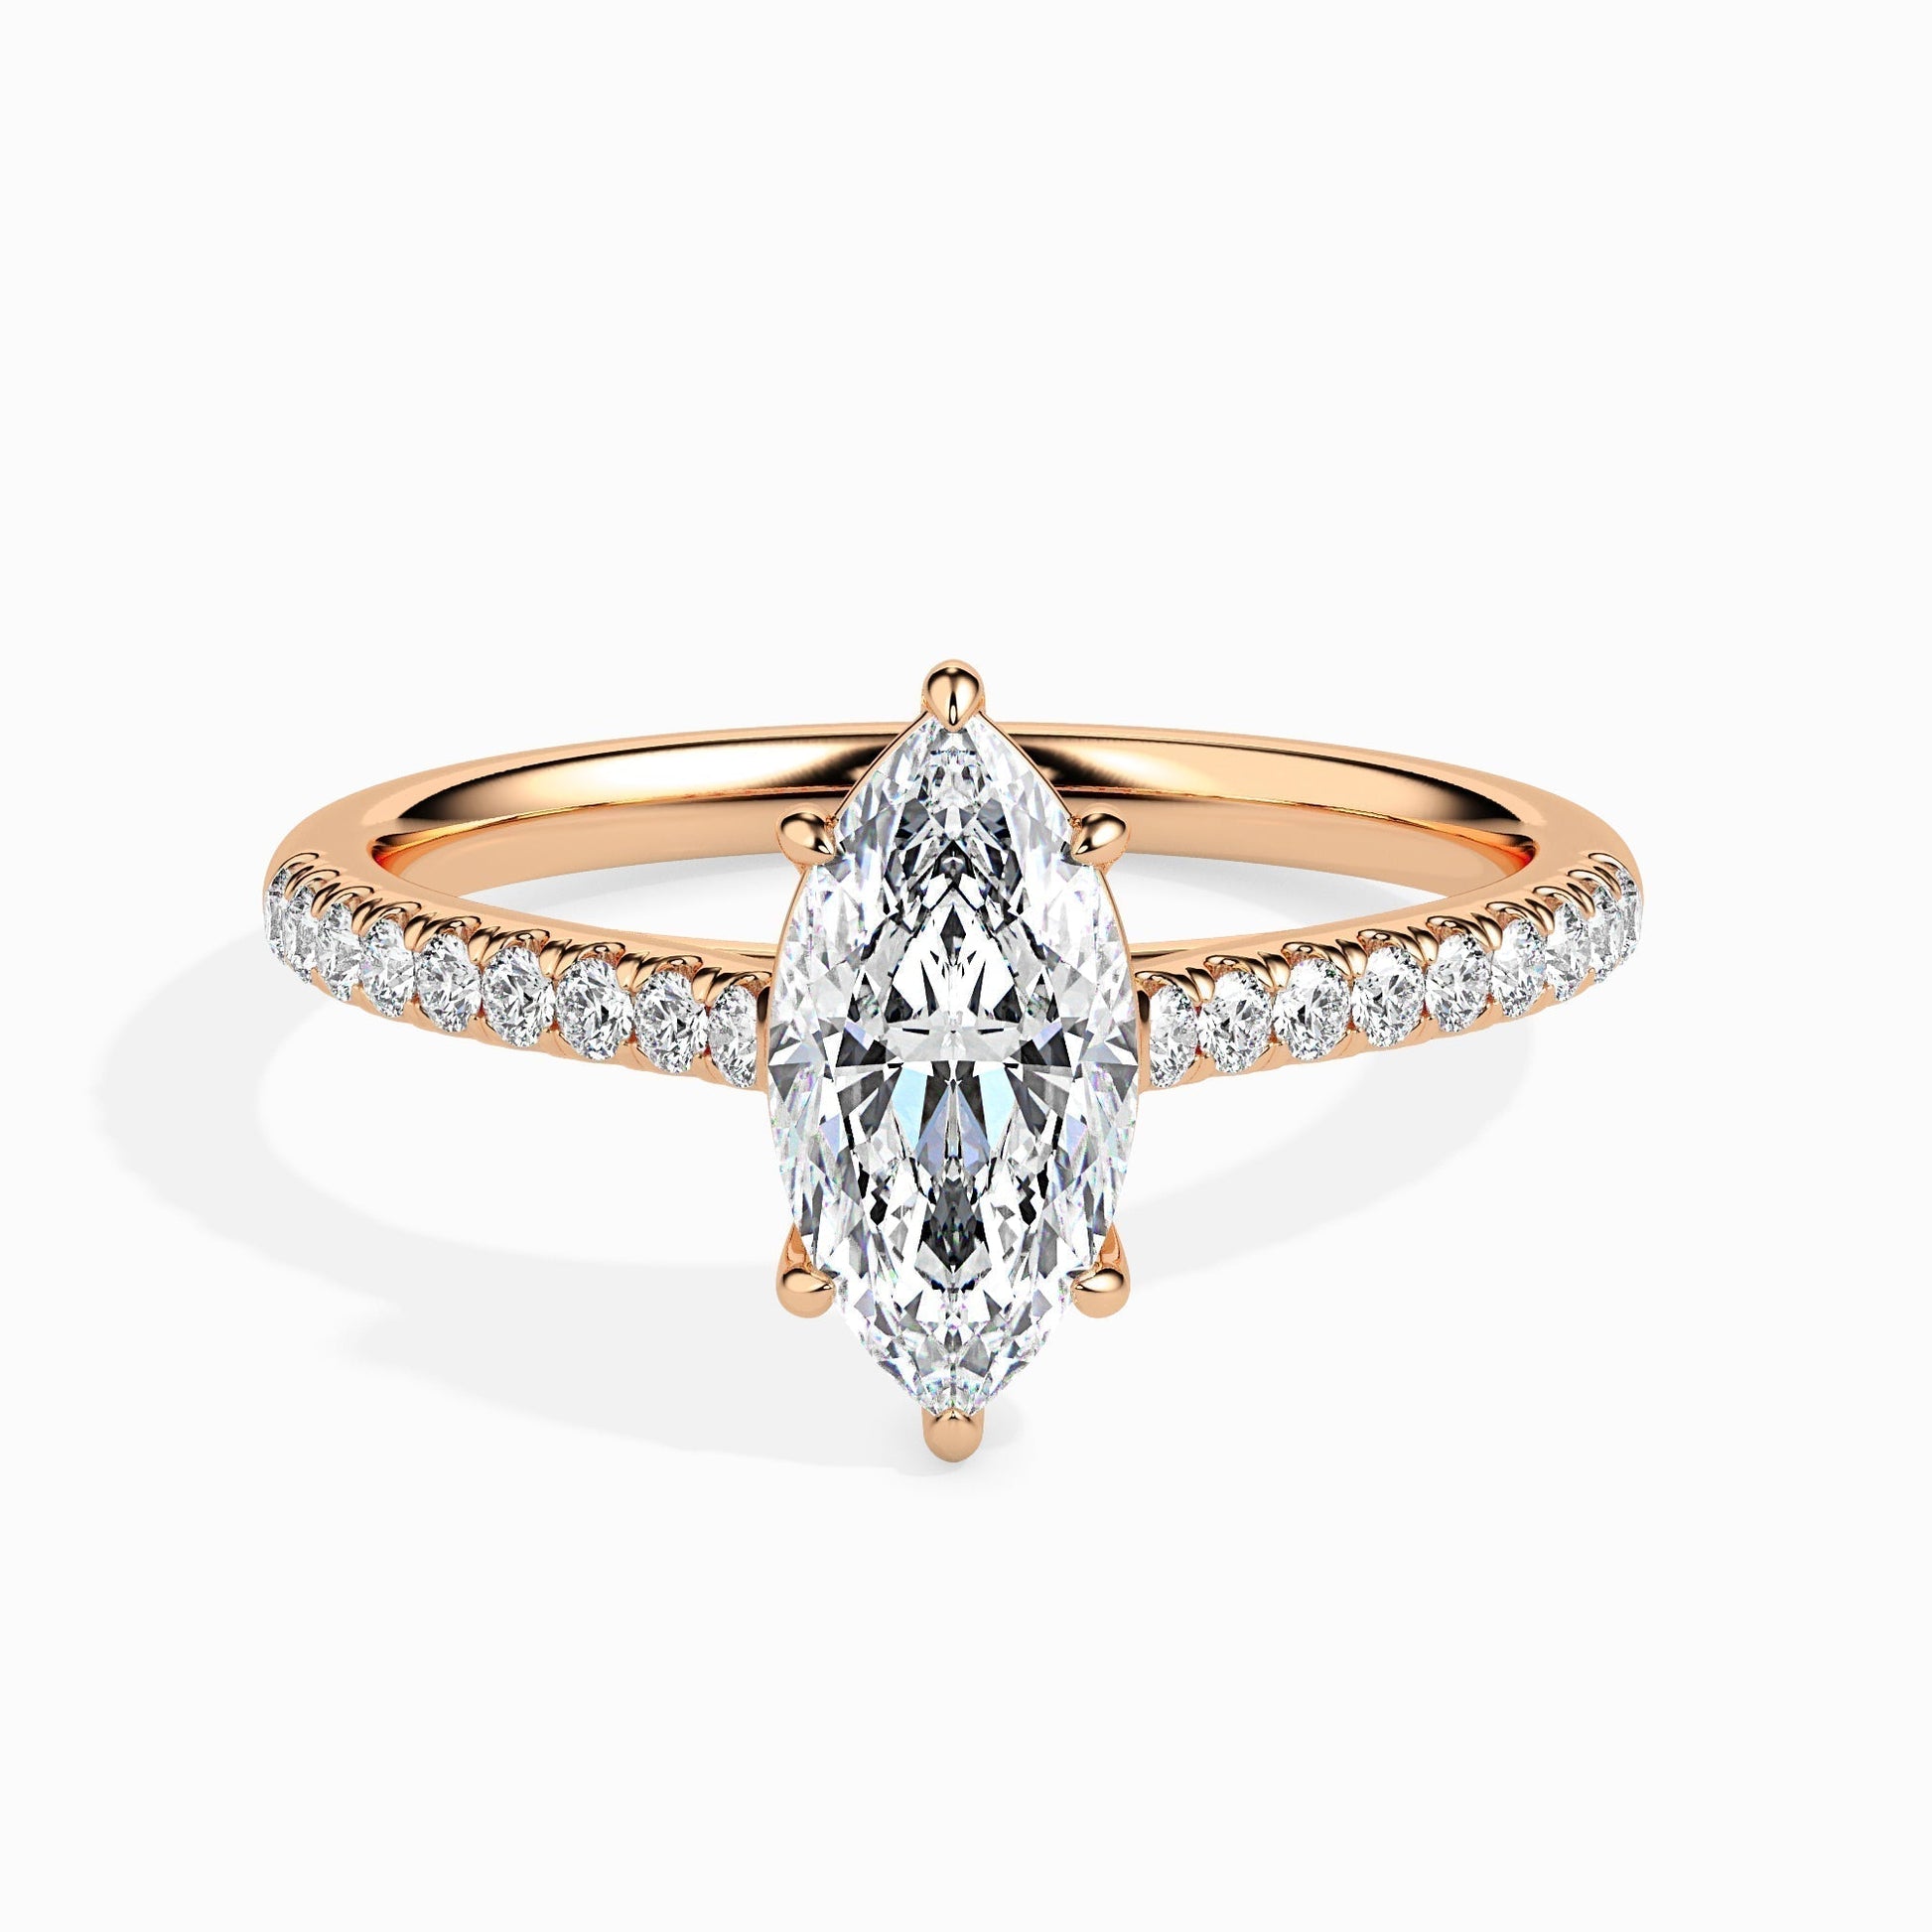 1.0 CT Marquise Solitaire CVD F/VS Diamond Engagement Ring 8